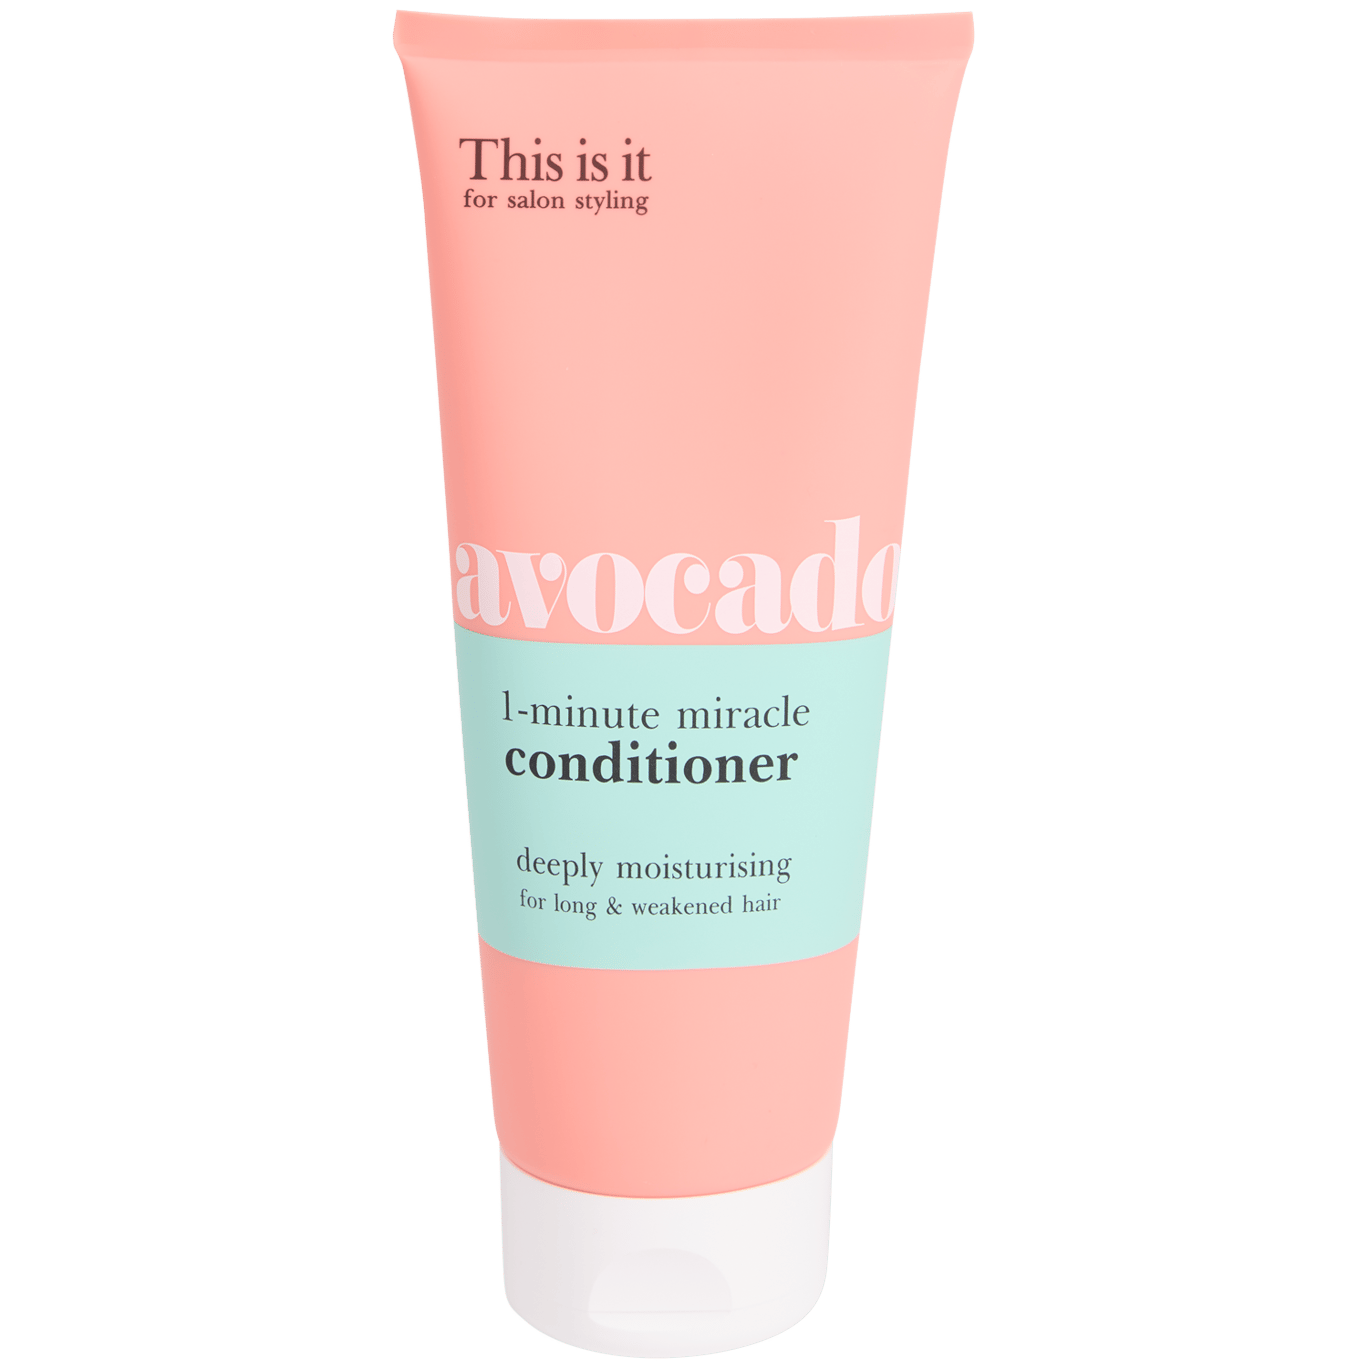 This is it 1-minute miracle conditioner